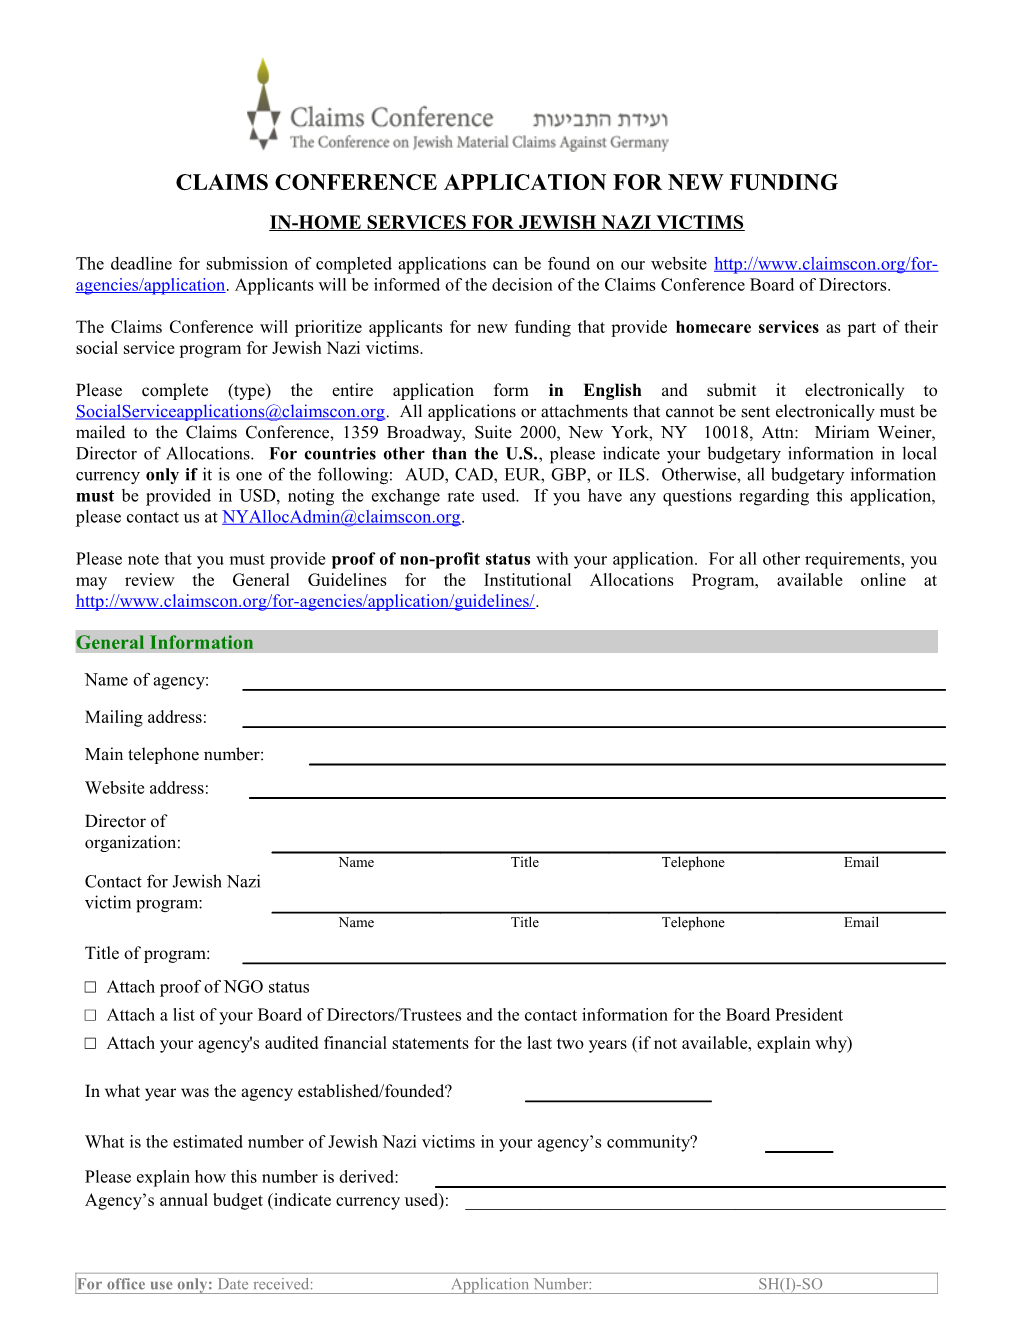 Application for an Allocation from the Funds Available to the Claims Conference Successor